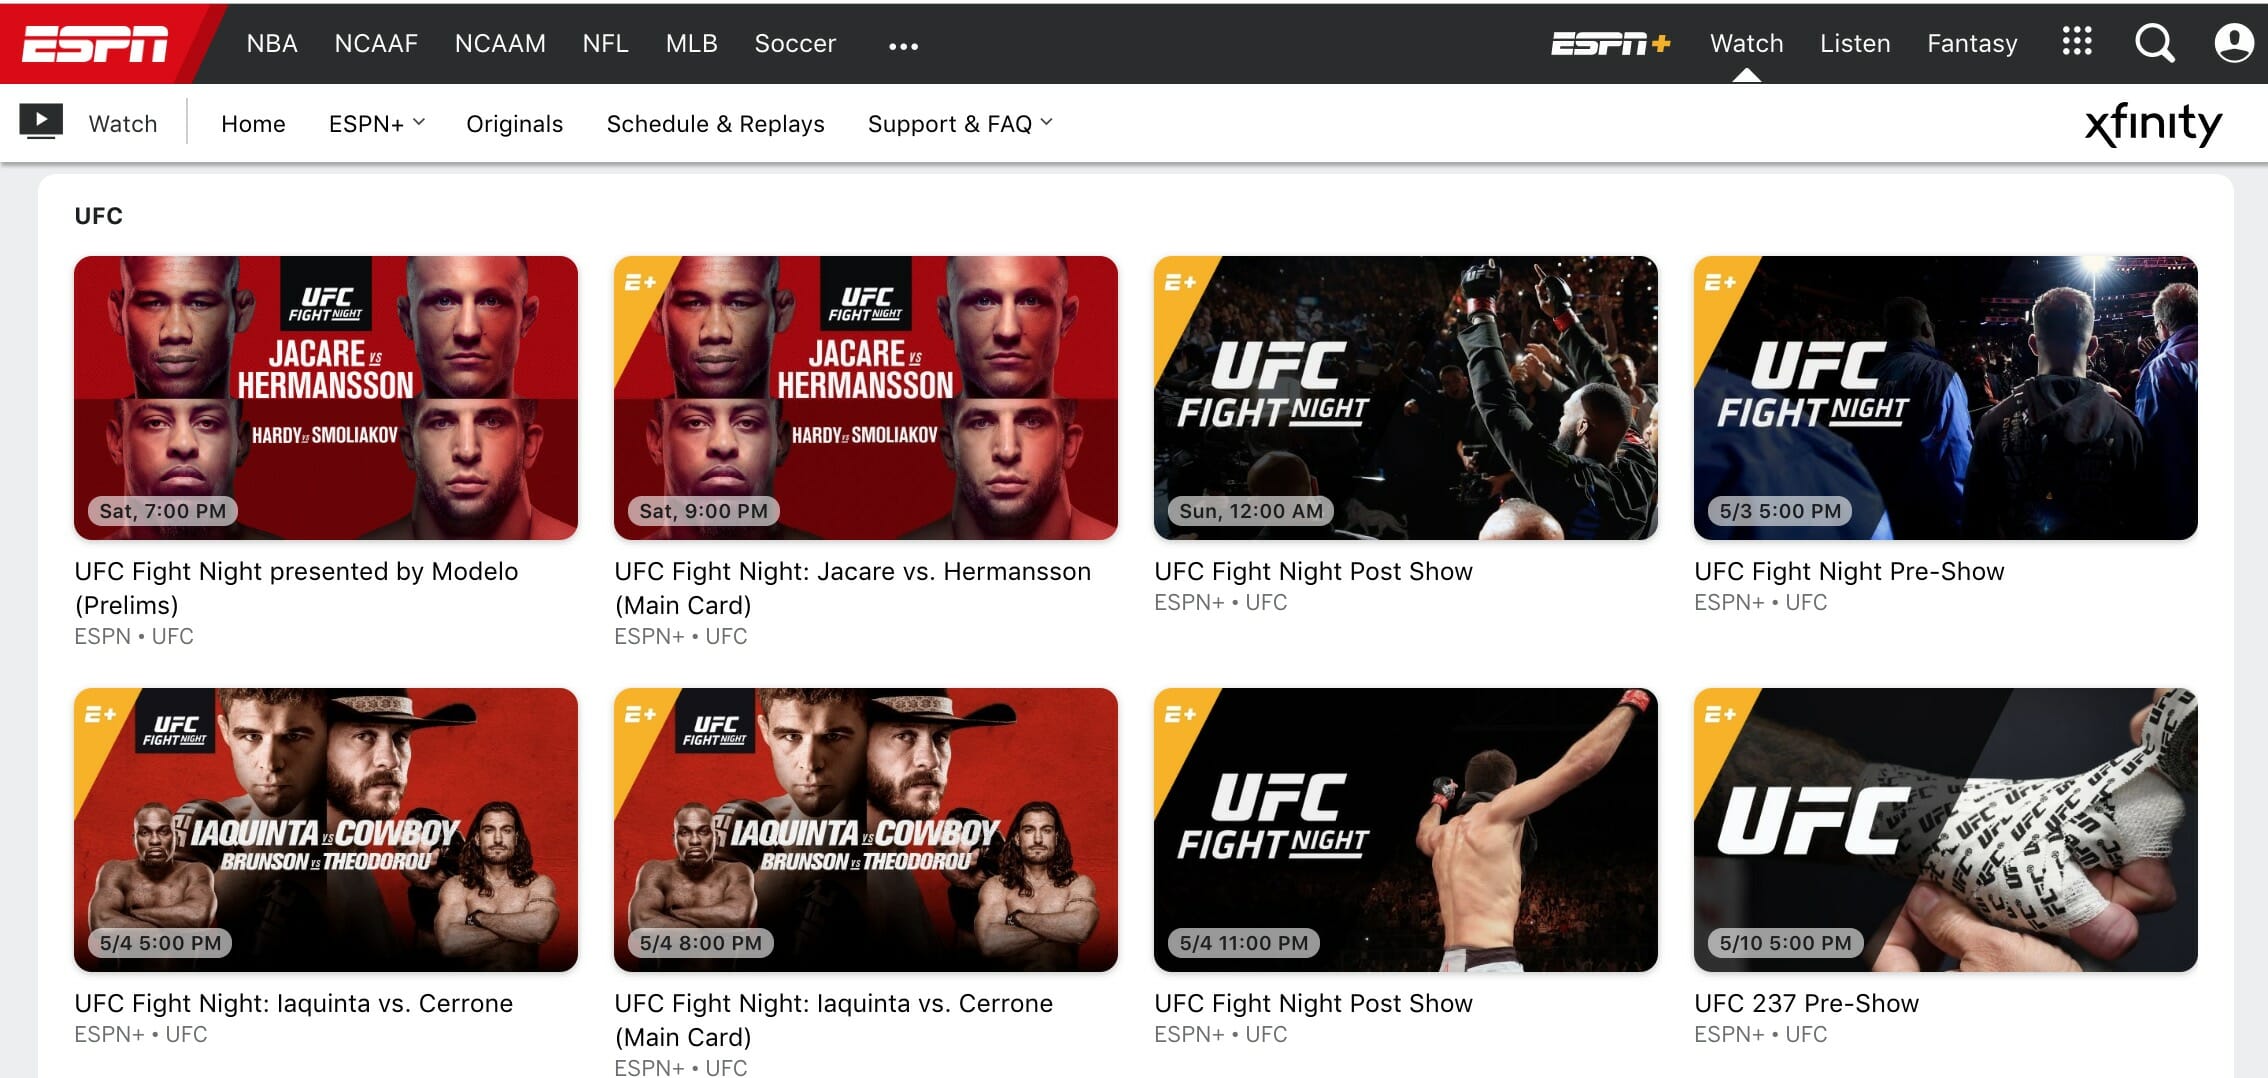 How to Watch UFC on ESPN+ for Free UFC Fight Night and More